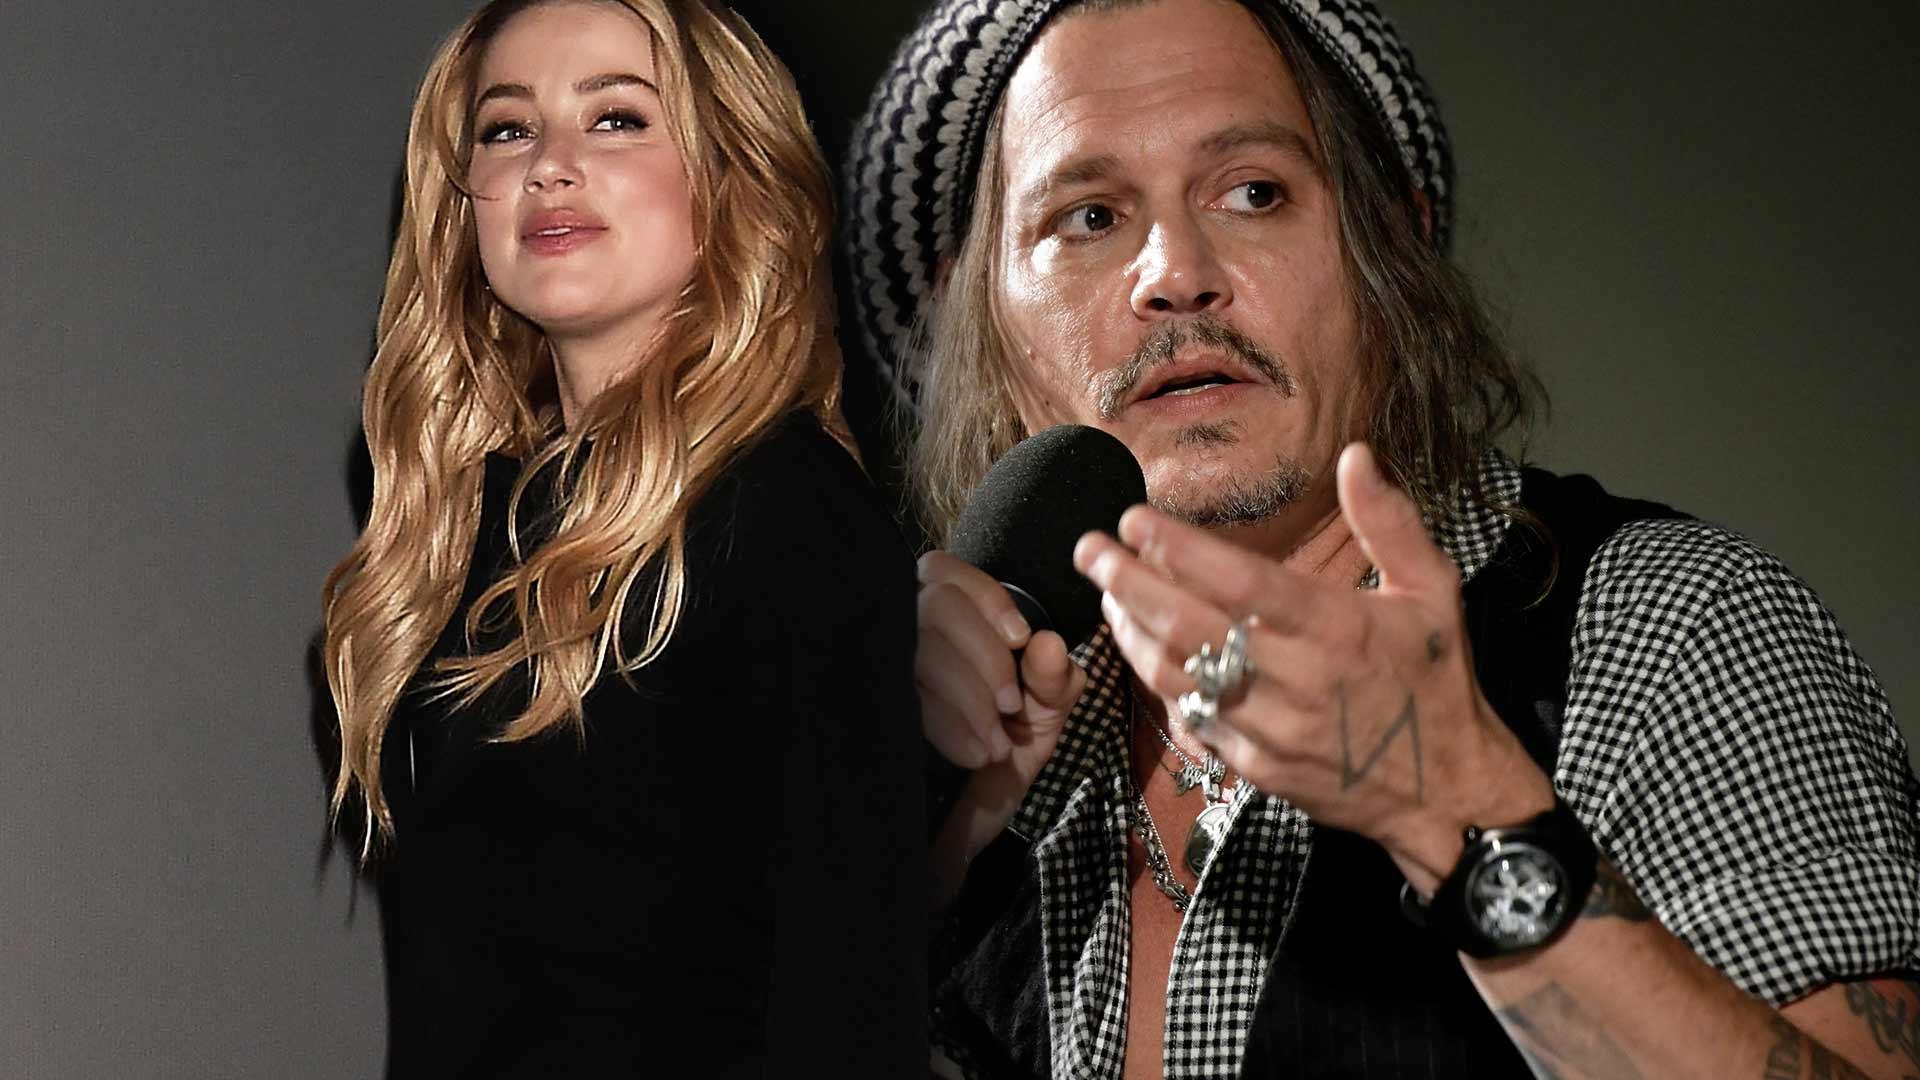 Johnny Depp Fights Back Against Claim He Tried to Get Amber Heard Fired From ‘Aquaman’